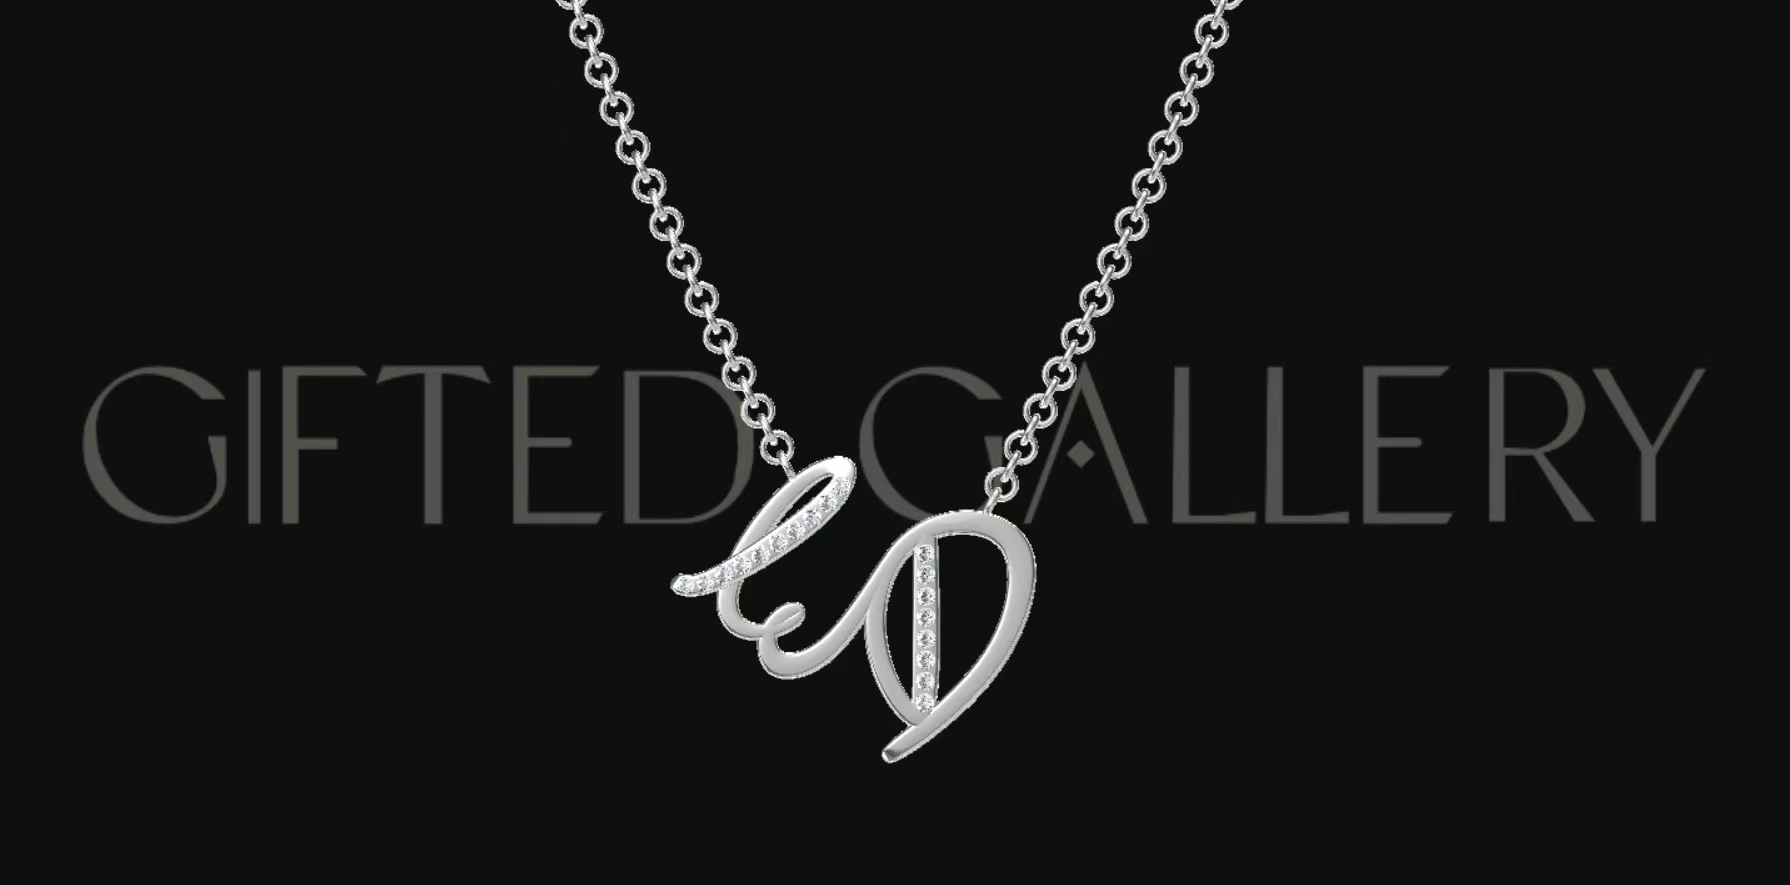 ED Diamond Necklace By Gifted Gallery